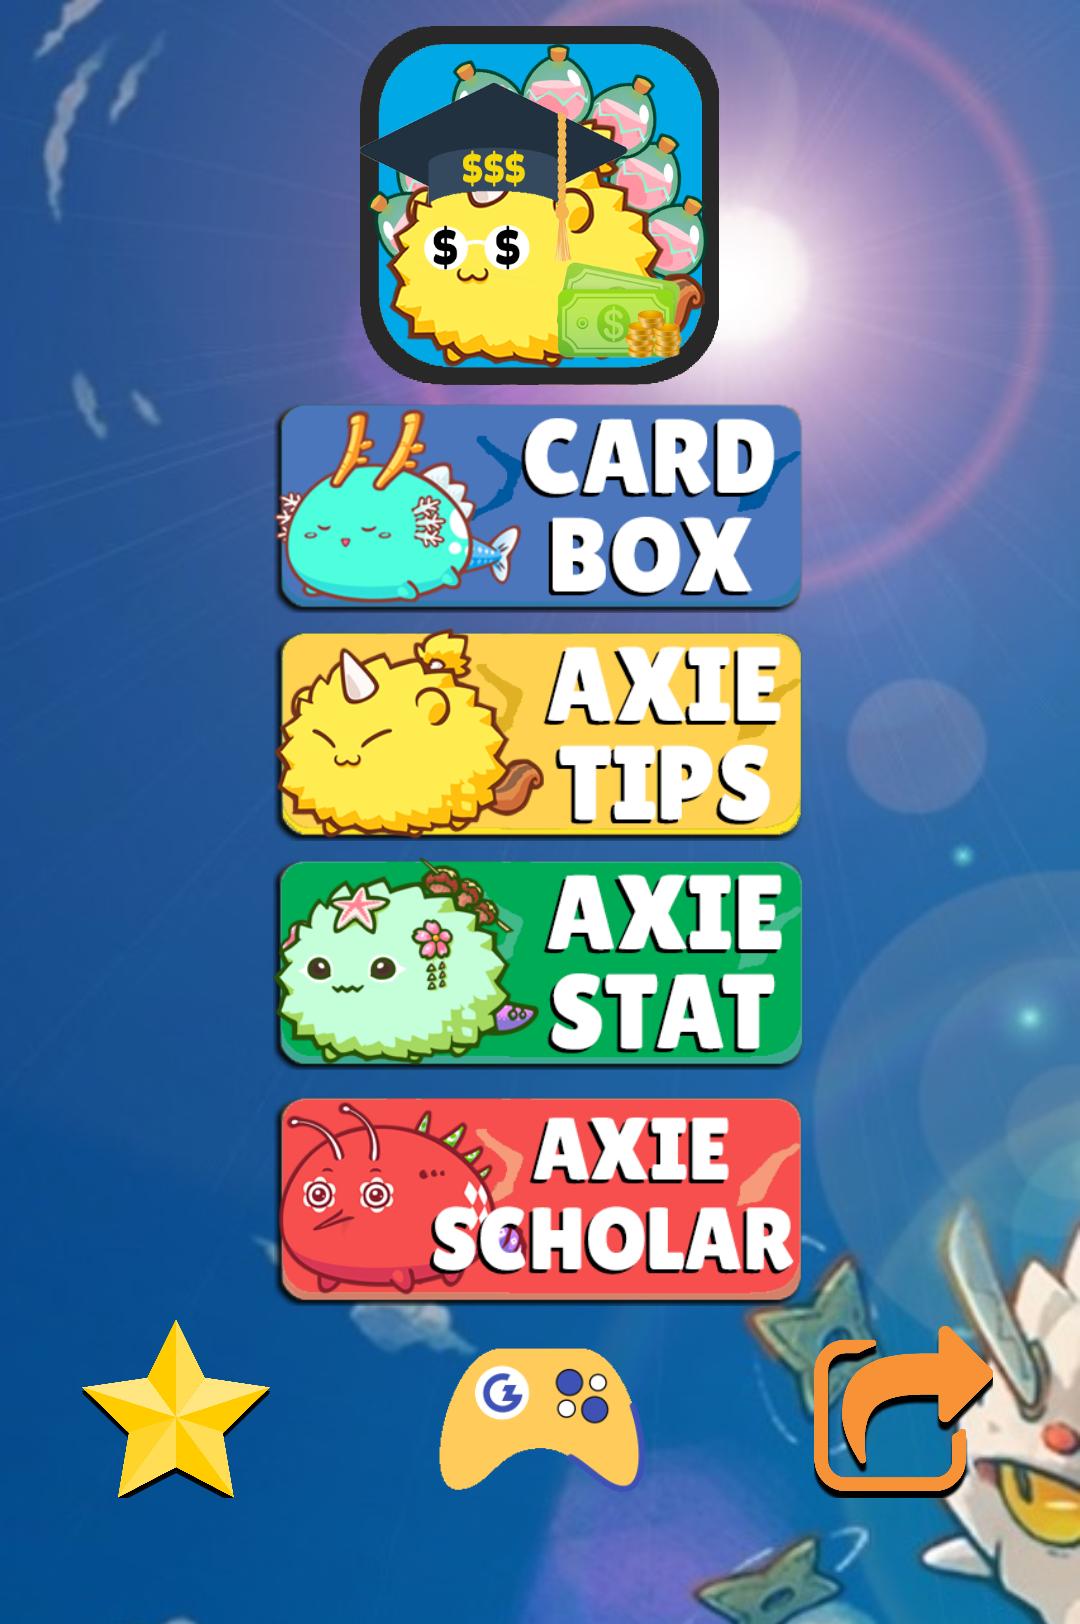 Support Axie Infinity Scholarship Program For Android Apk Download